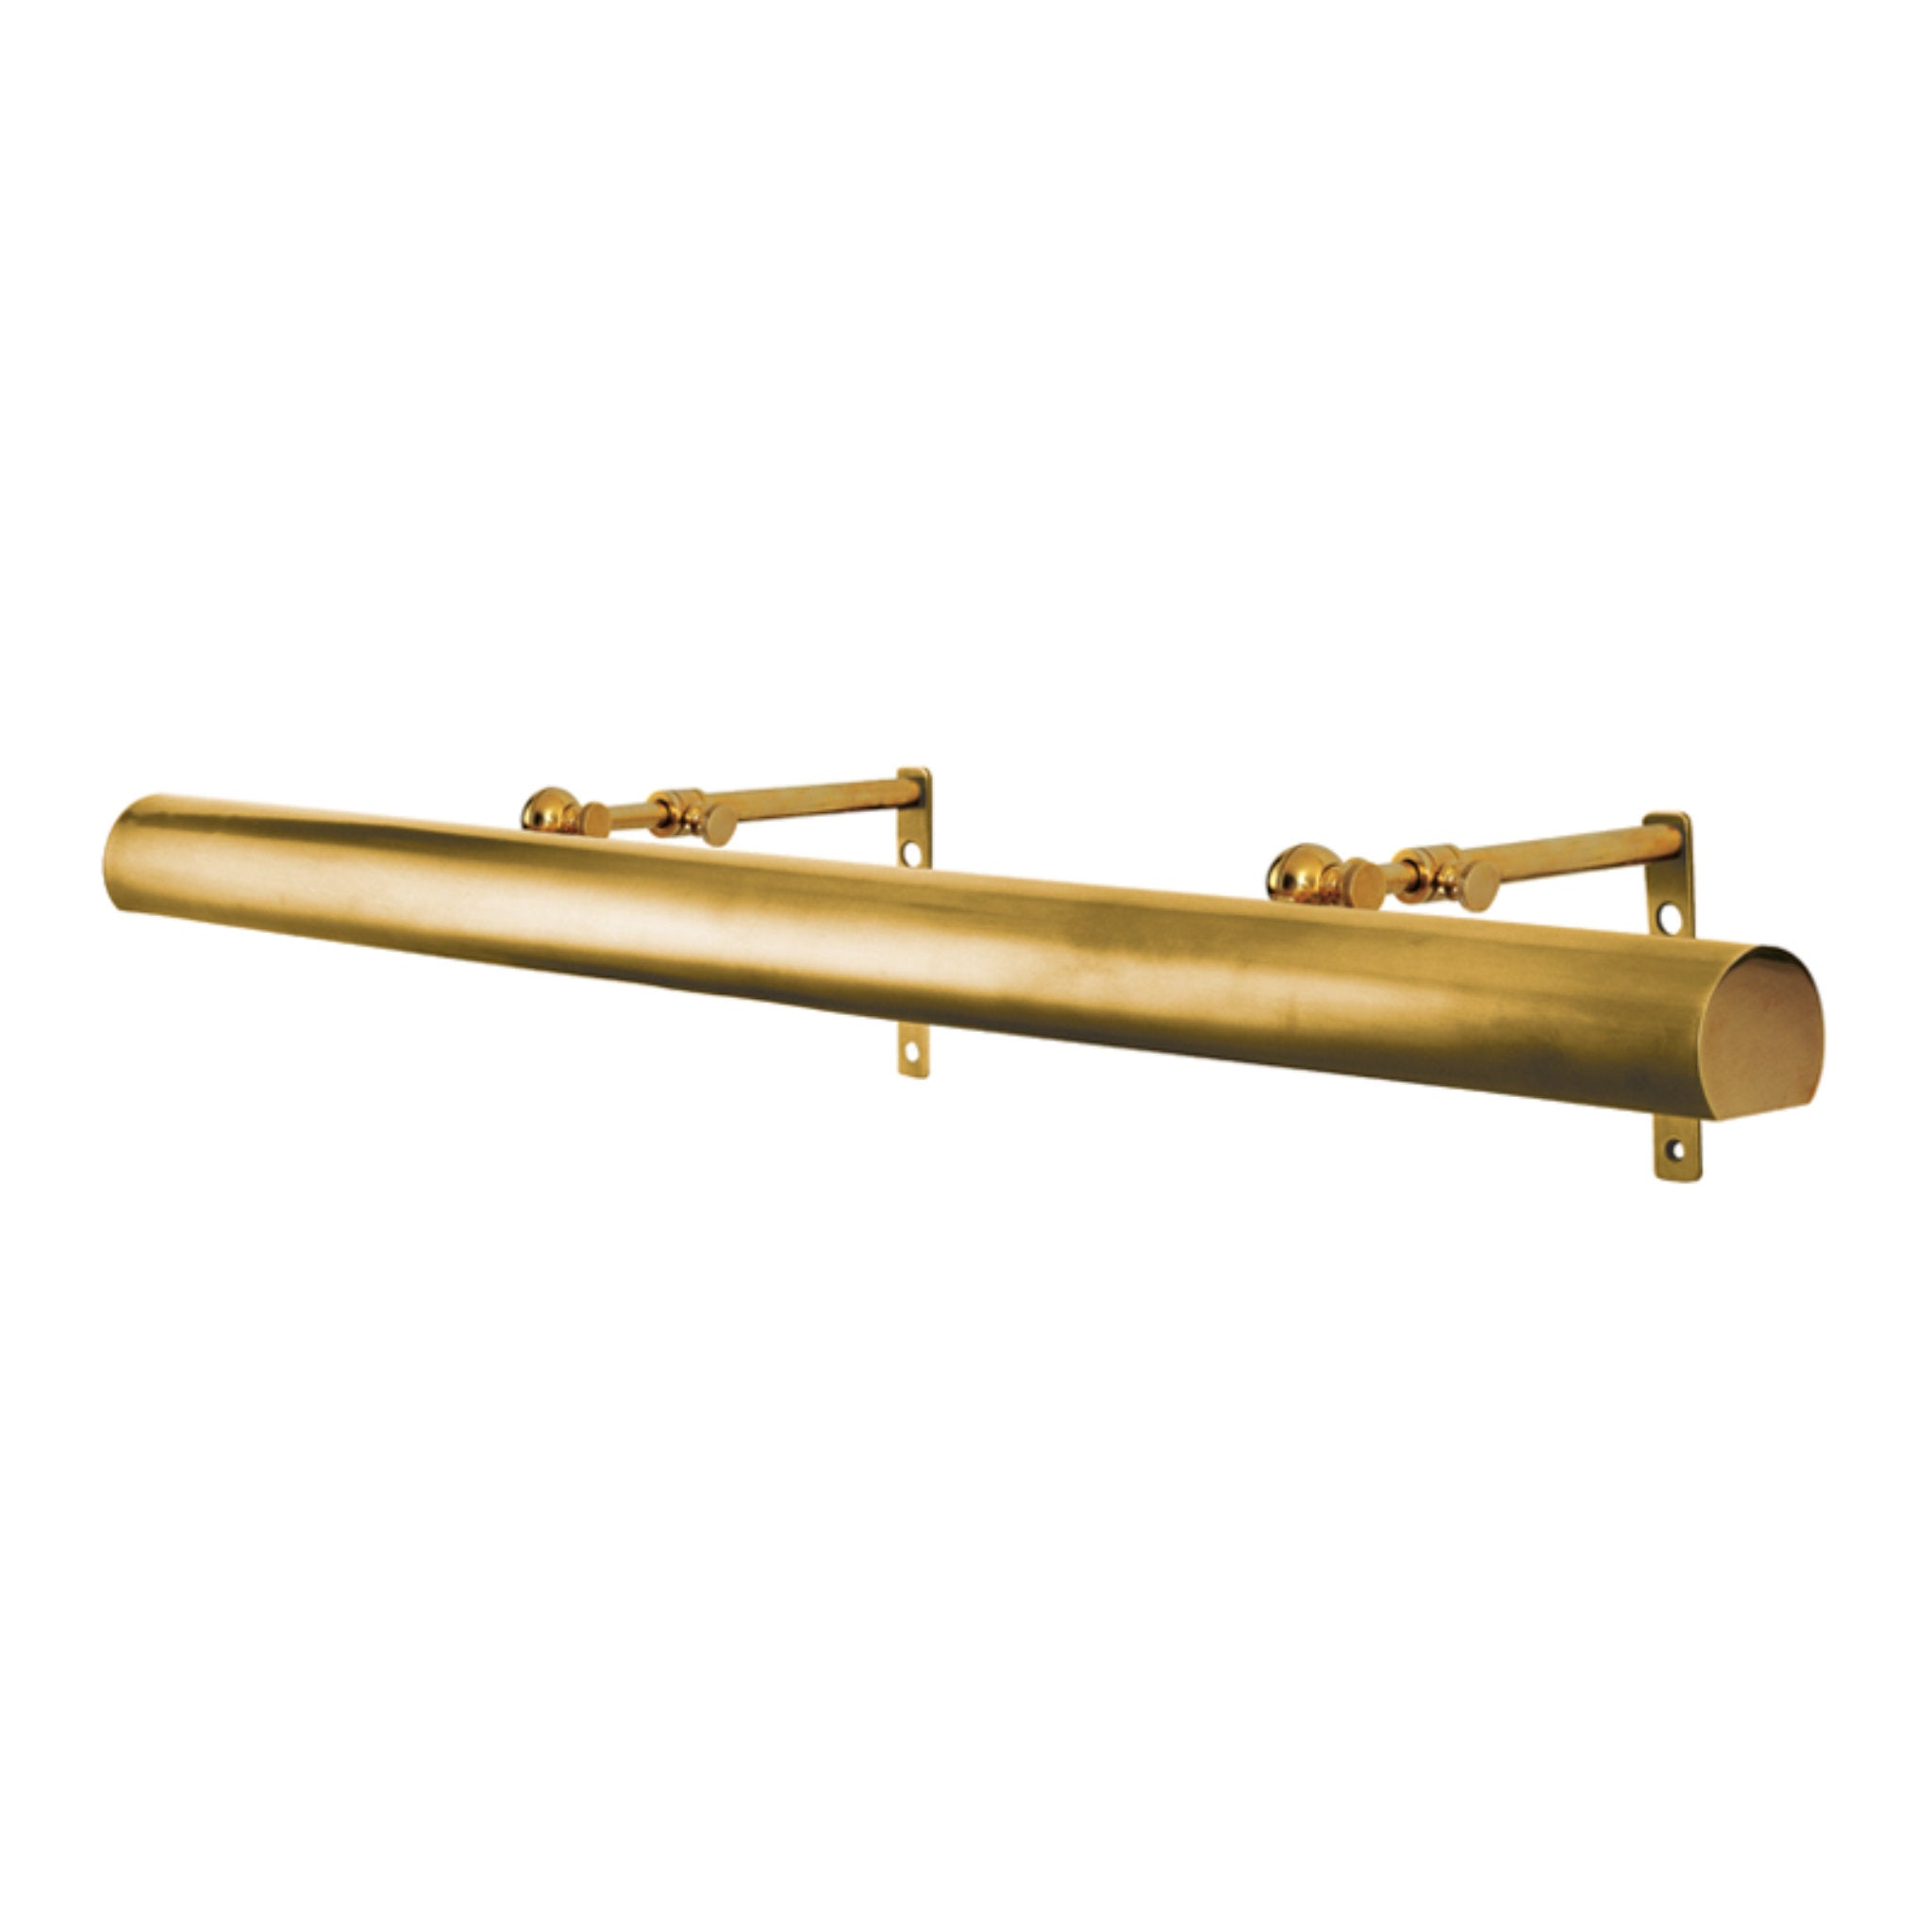 Vernon 4 Light Plug-in Sconce in Aged Brass